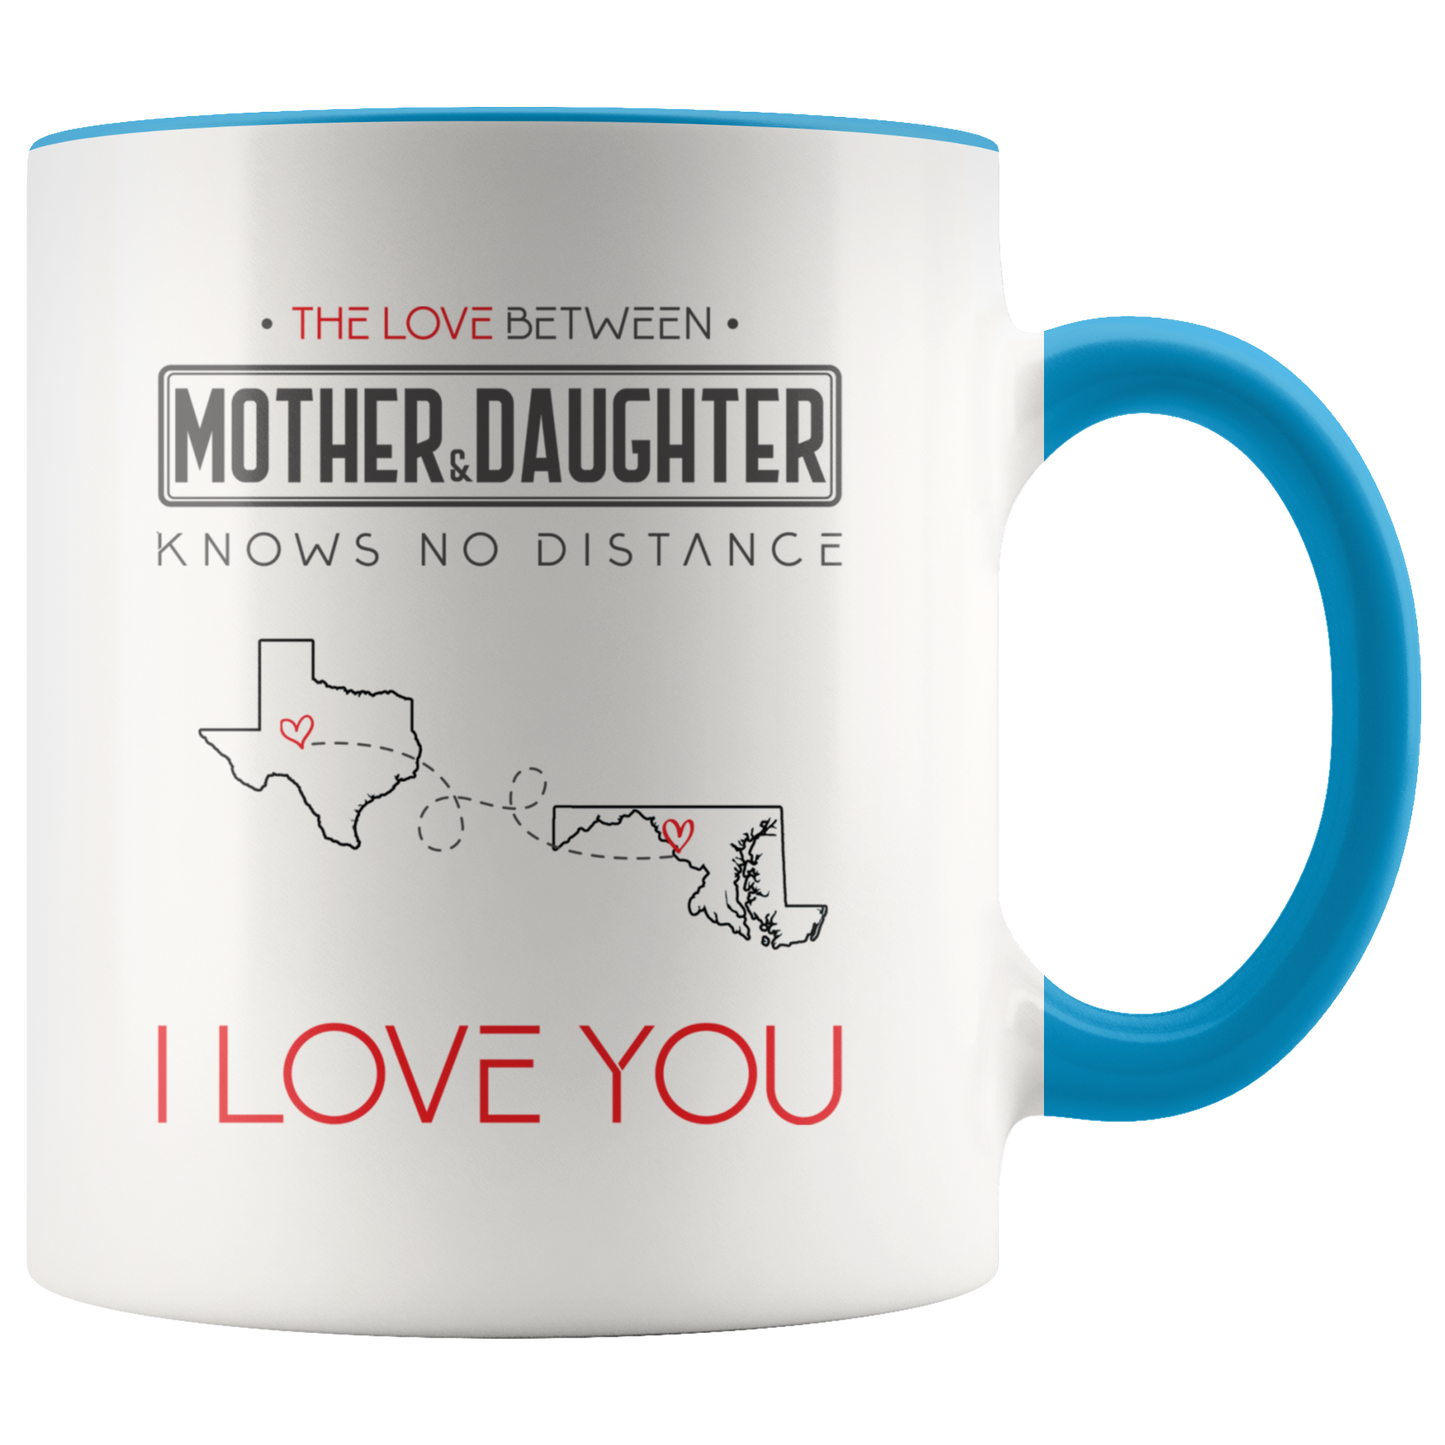 ND-21313864-sp-24254 - [ Texas | Maryland ]Mom And Daughter Accent Mug 11 oz Red - The Love Between Mot